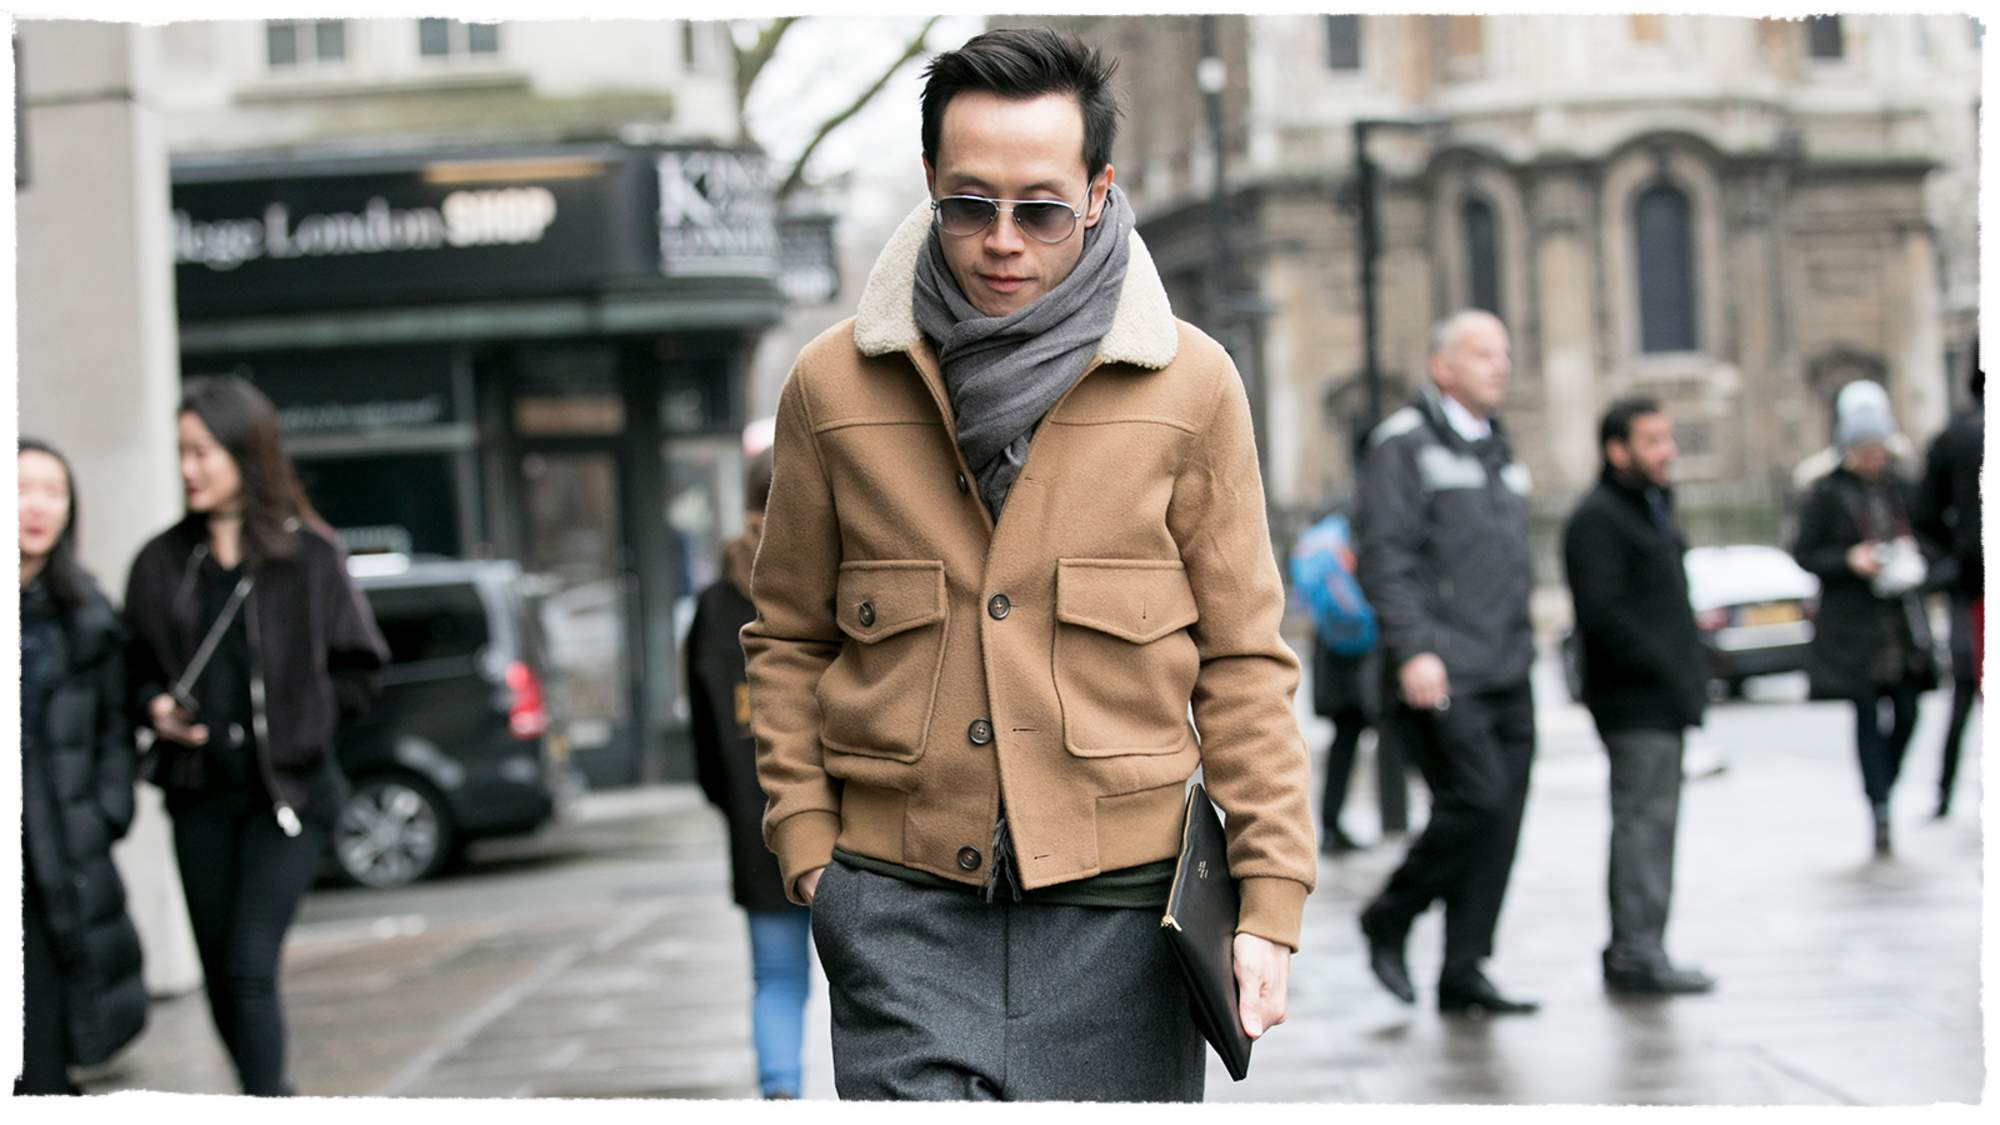 SEVEN WAYS TO WEAR YOUR SCARF IN STYLE